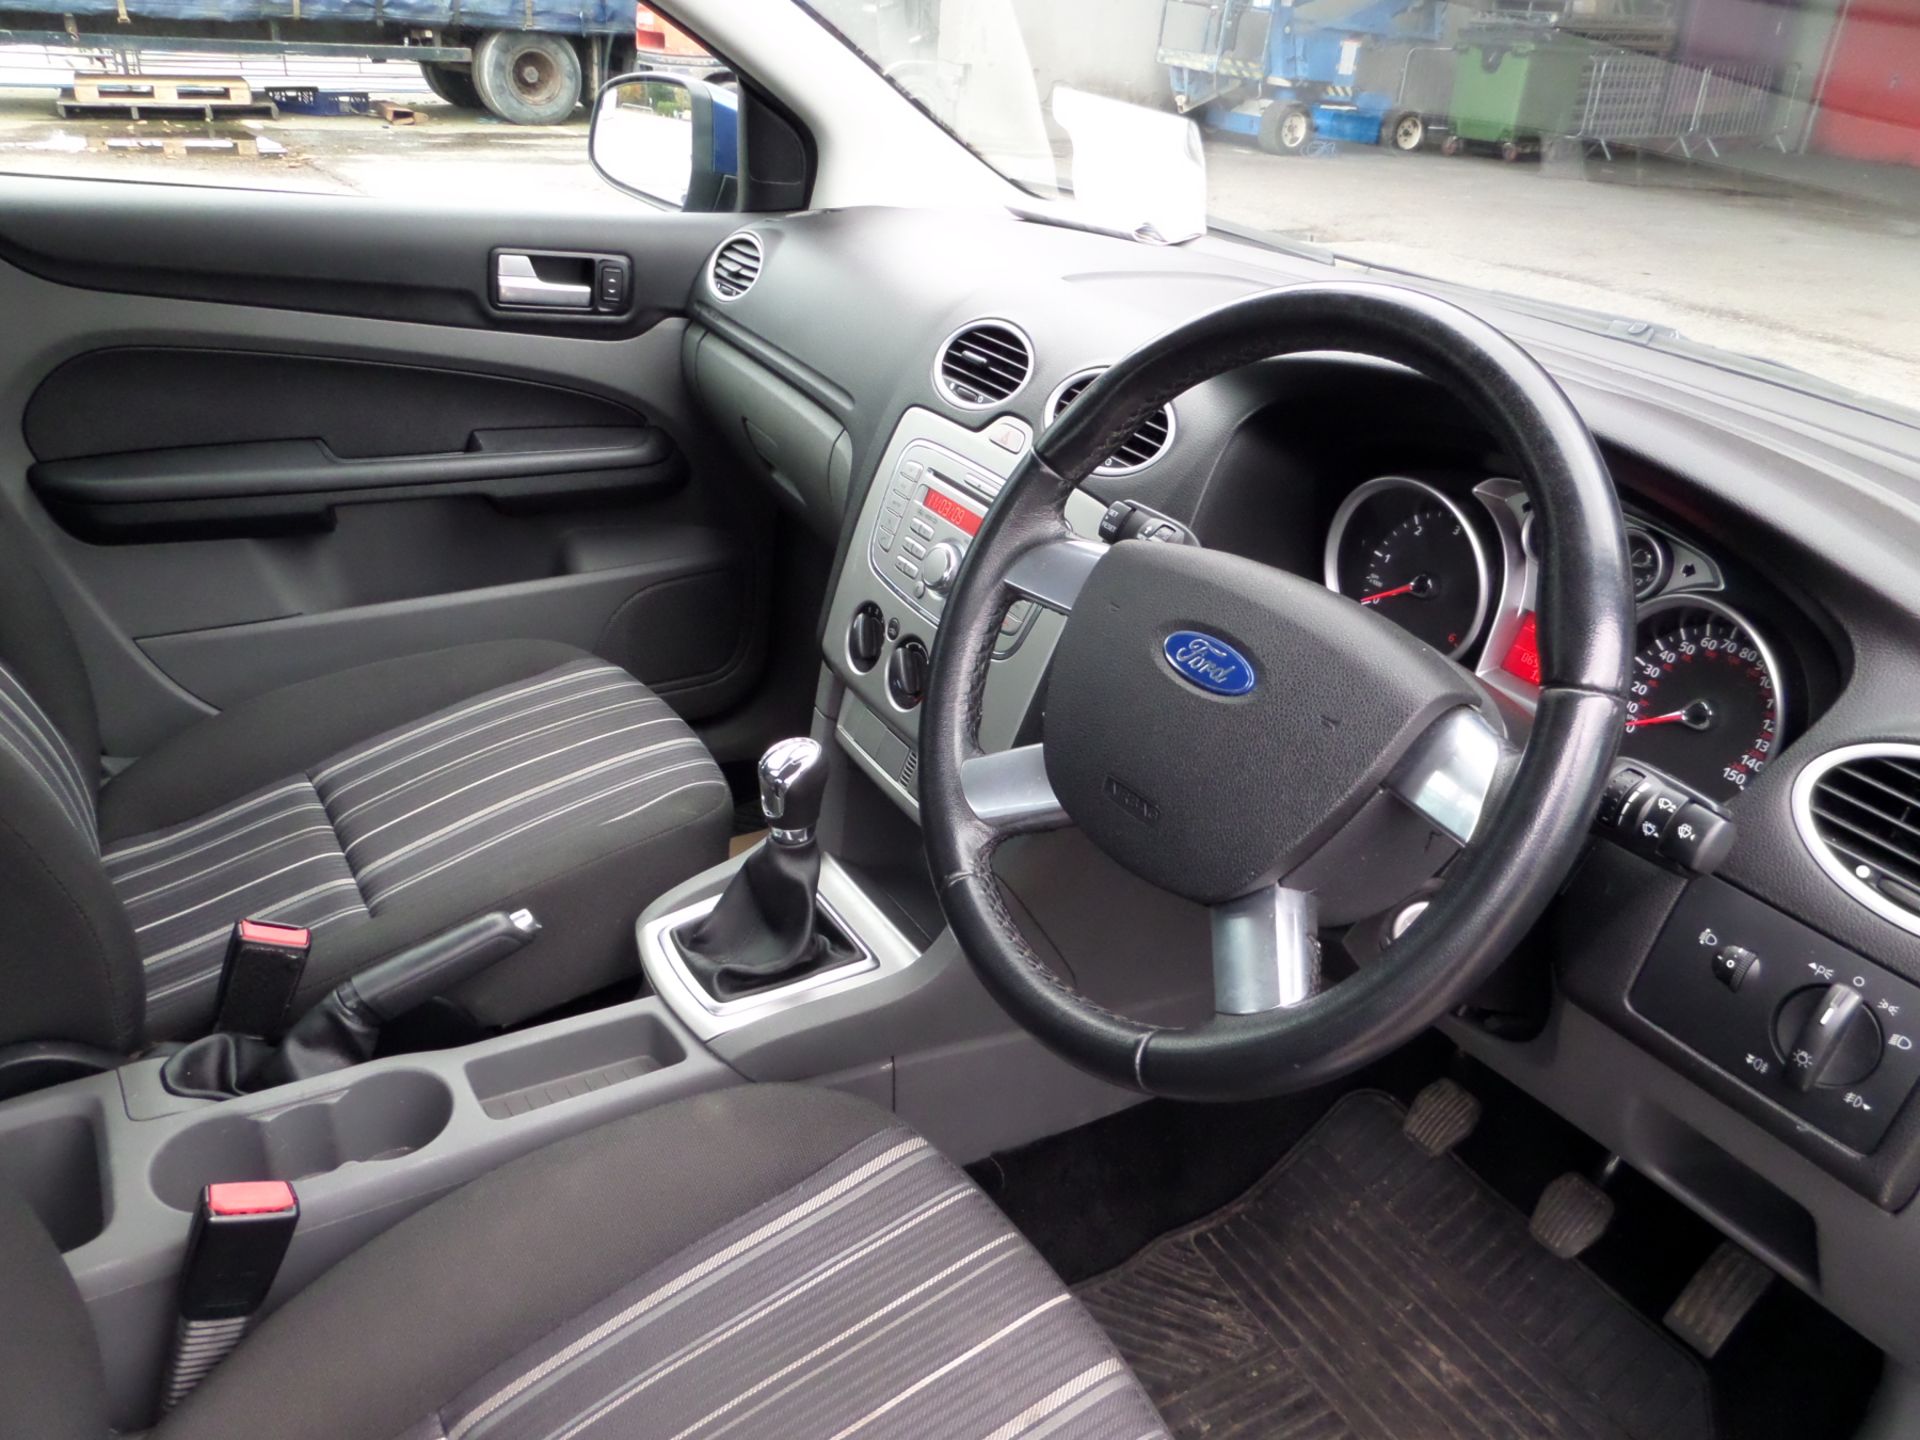 Ford Focus Style Td 115 - 1753cc 5 Door - Image 8 of 11